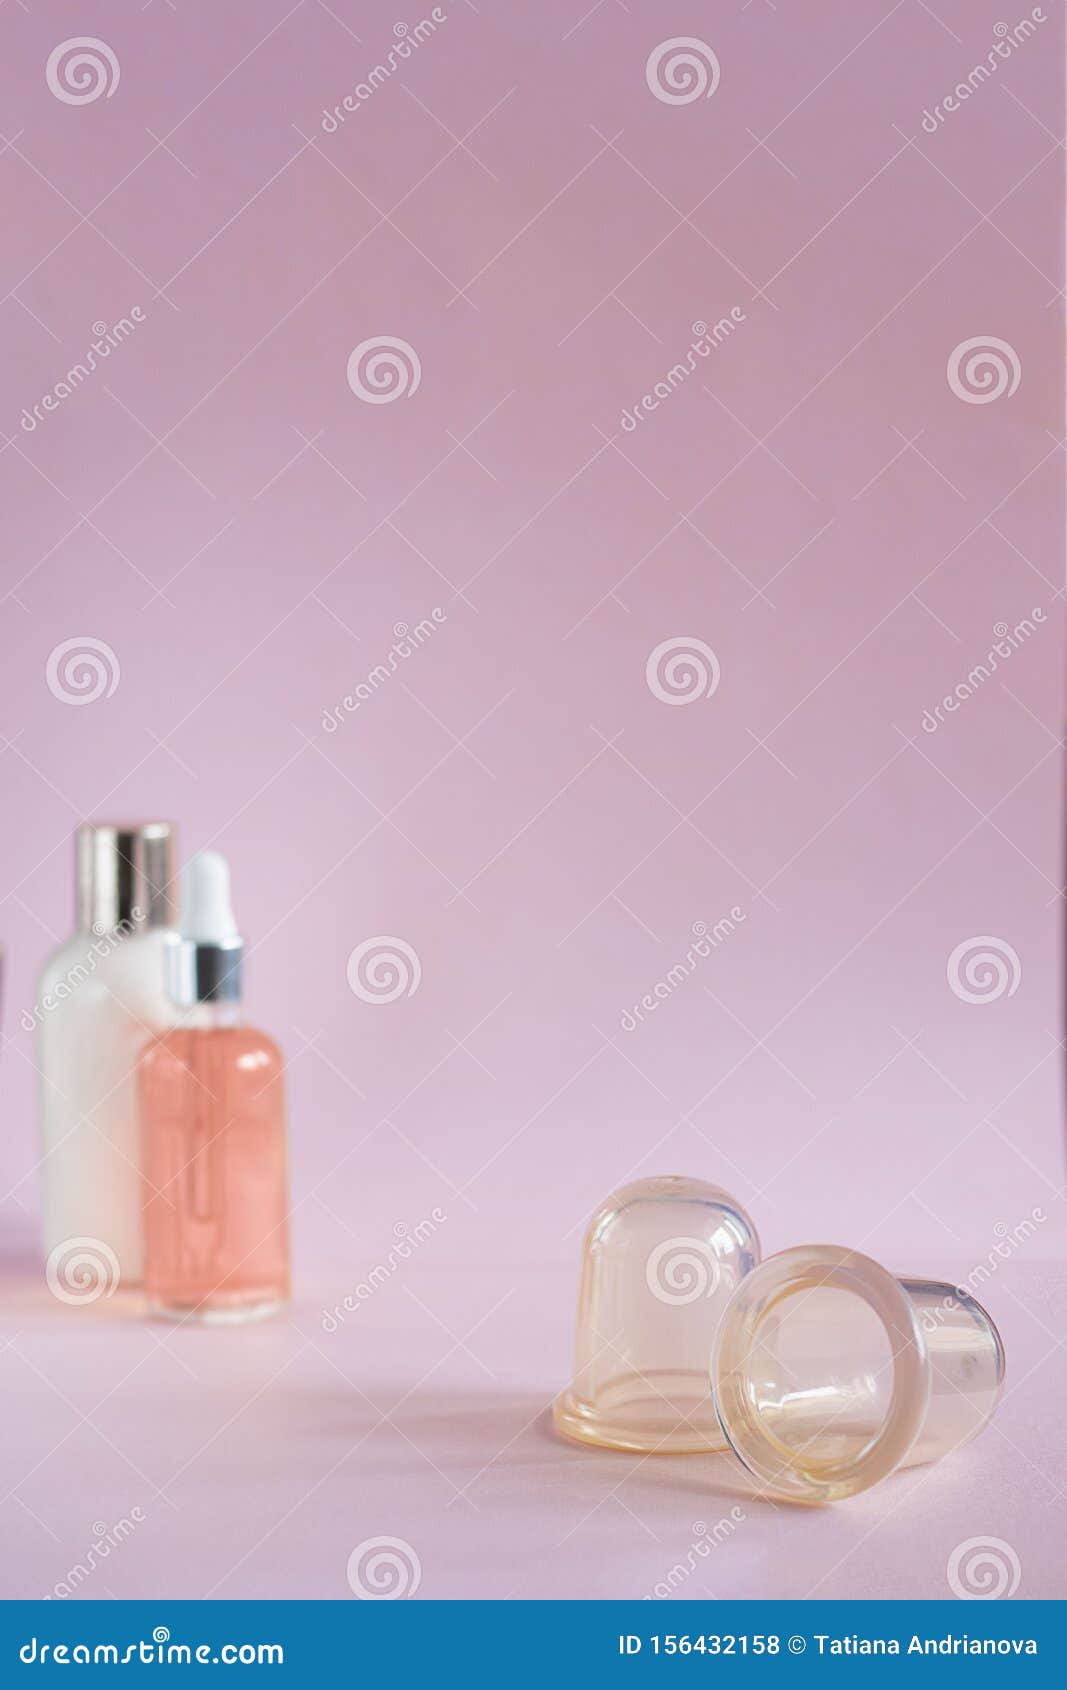 silicon vacuum cuppings and defocused mochup bottles, woman body and skincare things, items for cellulite, on pink empty